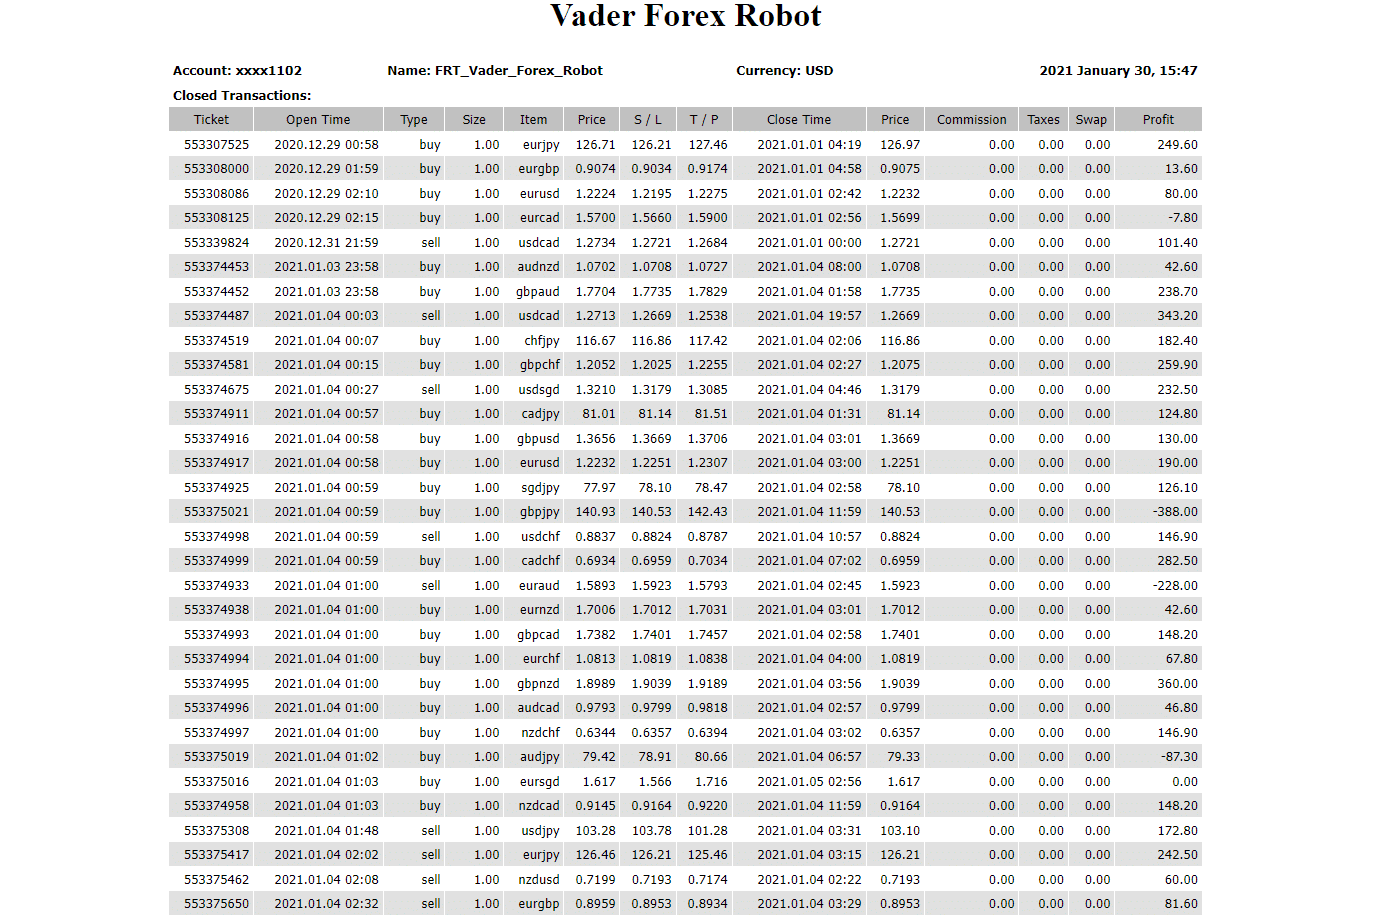 Trading results of Vader Forex Robot.